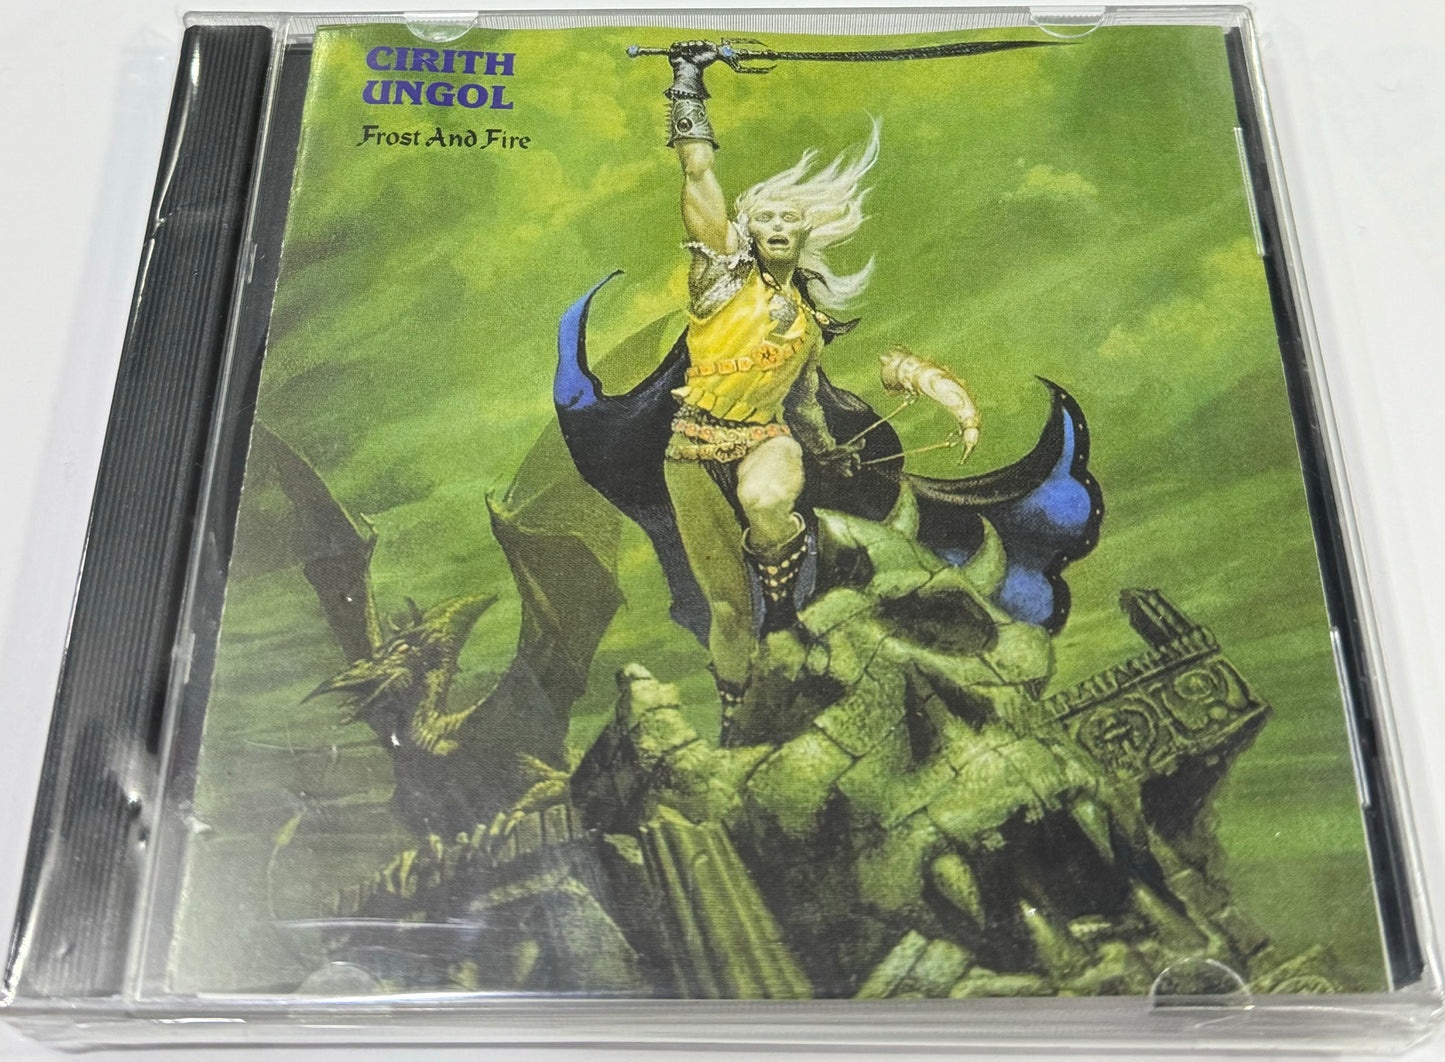 CIRITH UNGOL - FROST AND FIRE  CD